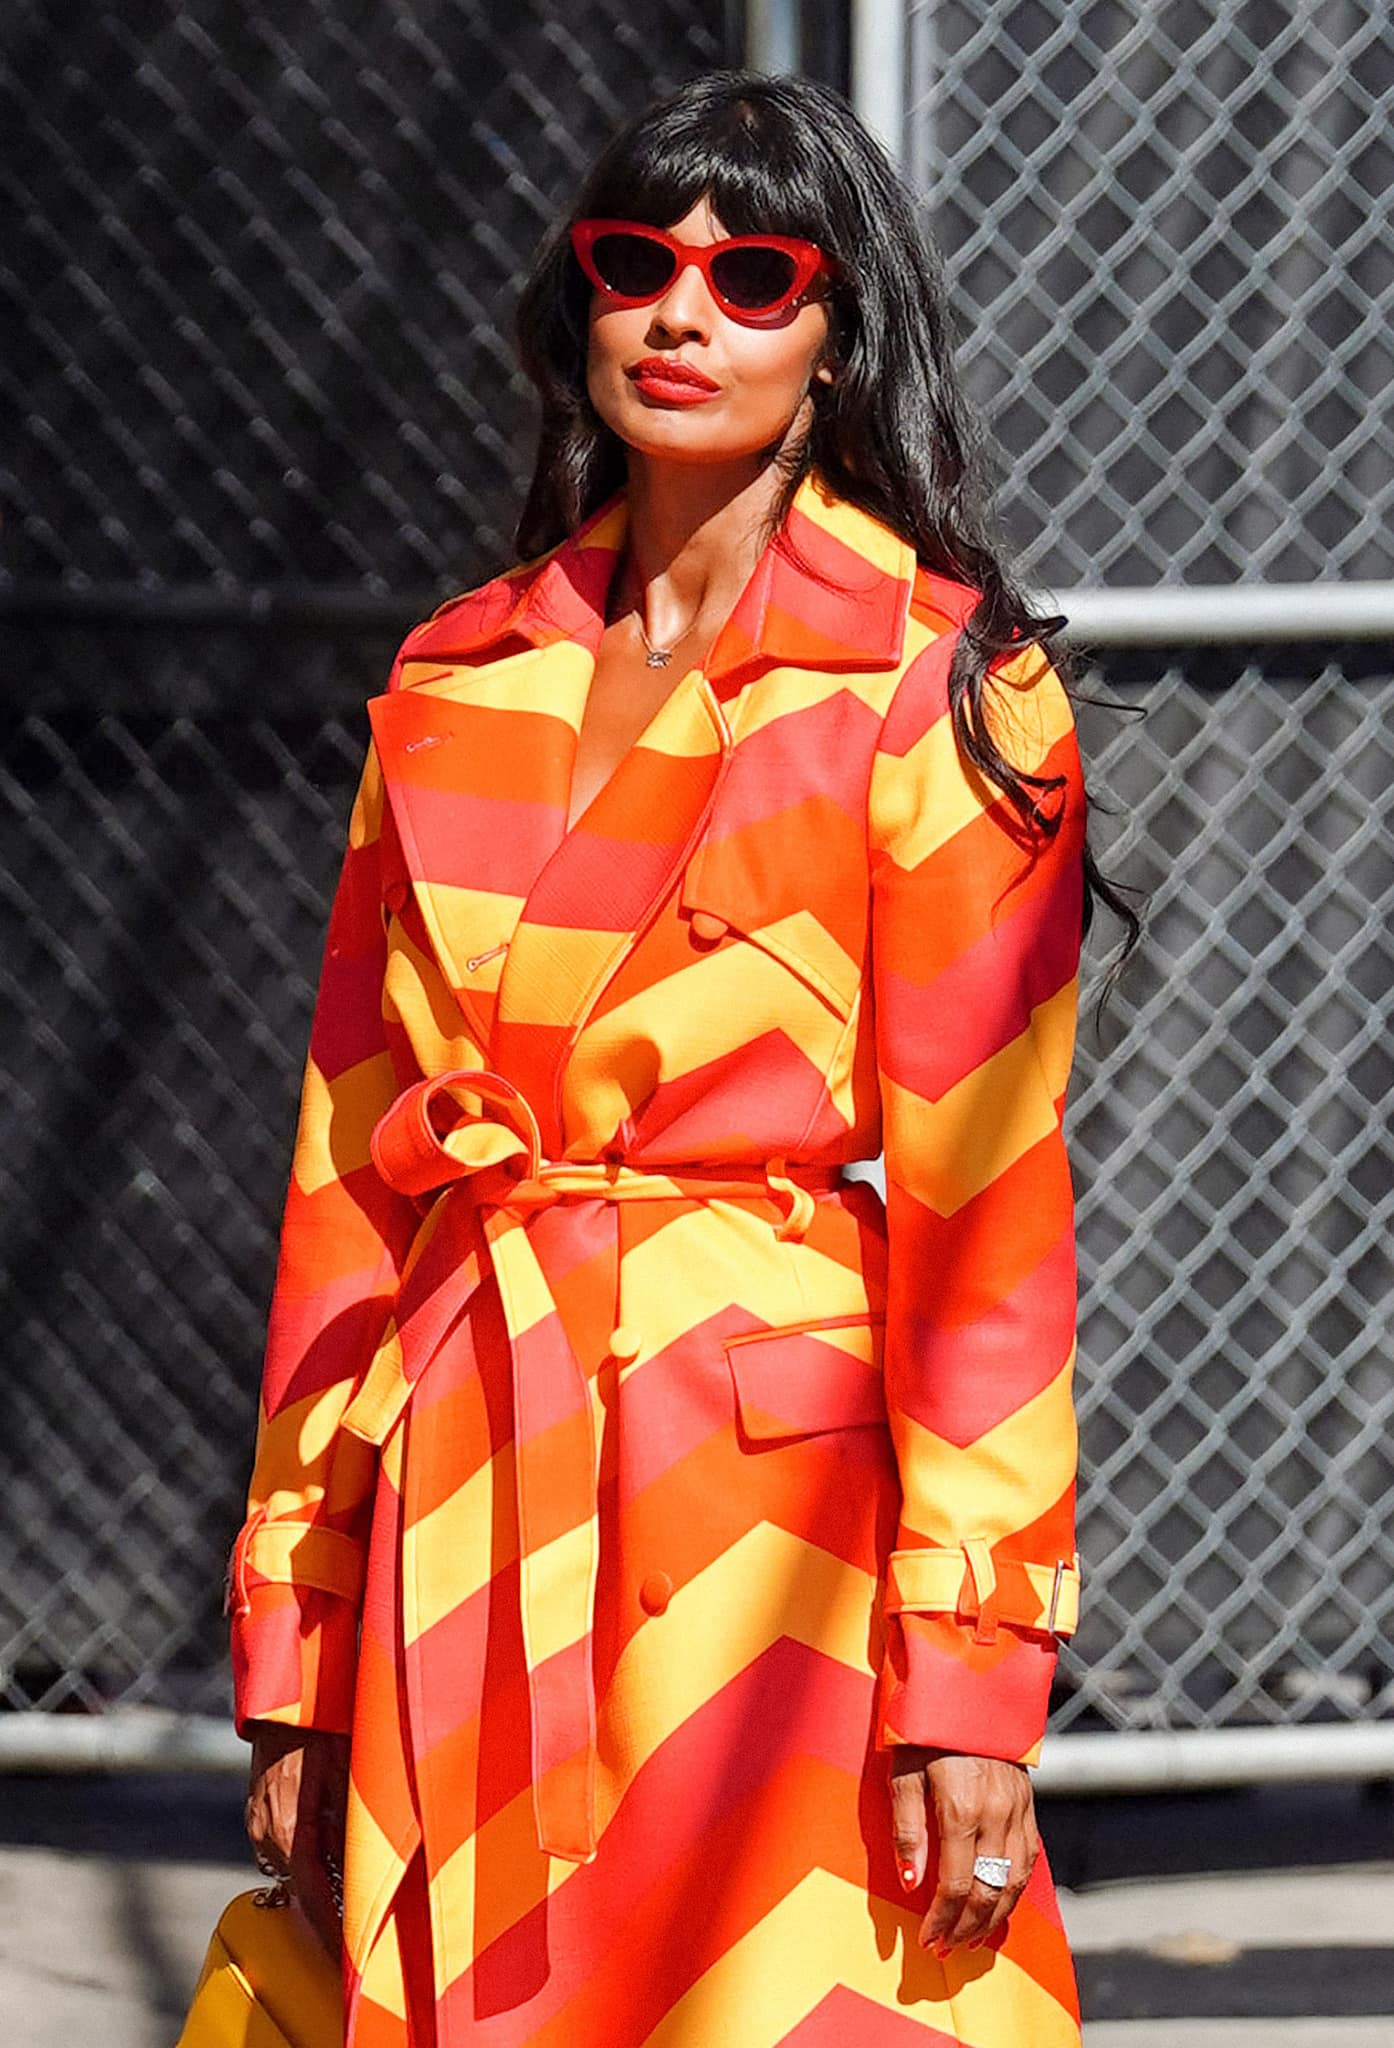 Jameela Jamil continues the vibrant theme of her look by wearing red Illesteva sunnies, red lipstick, and red nail polish